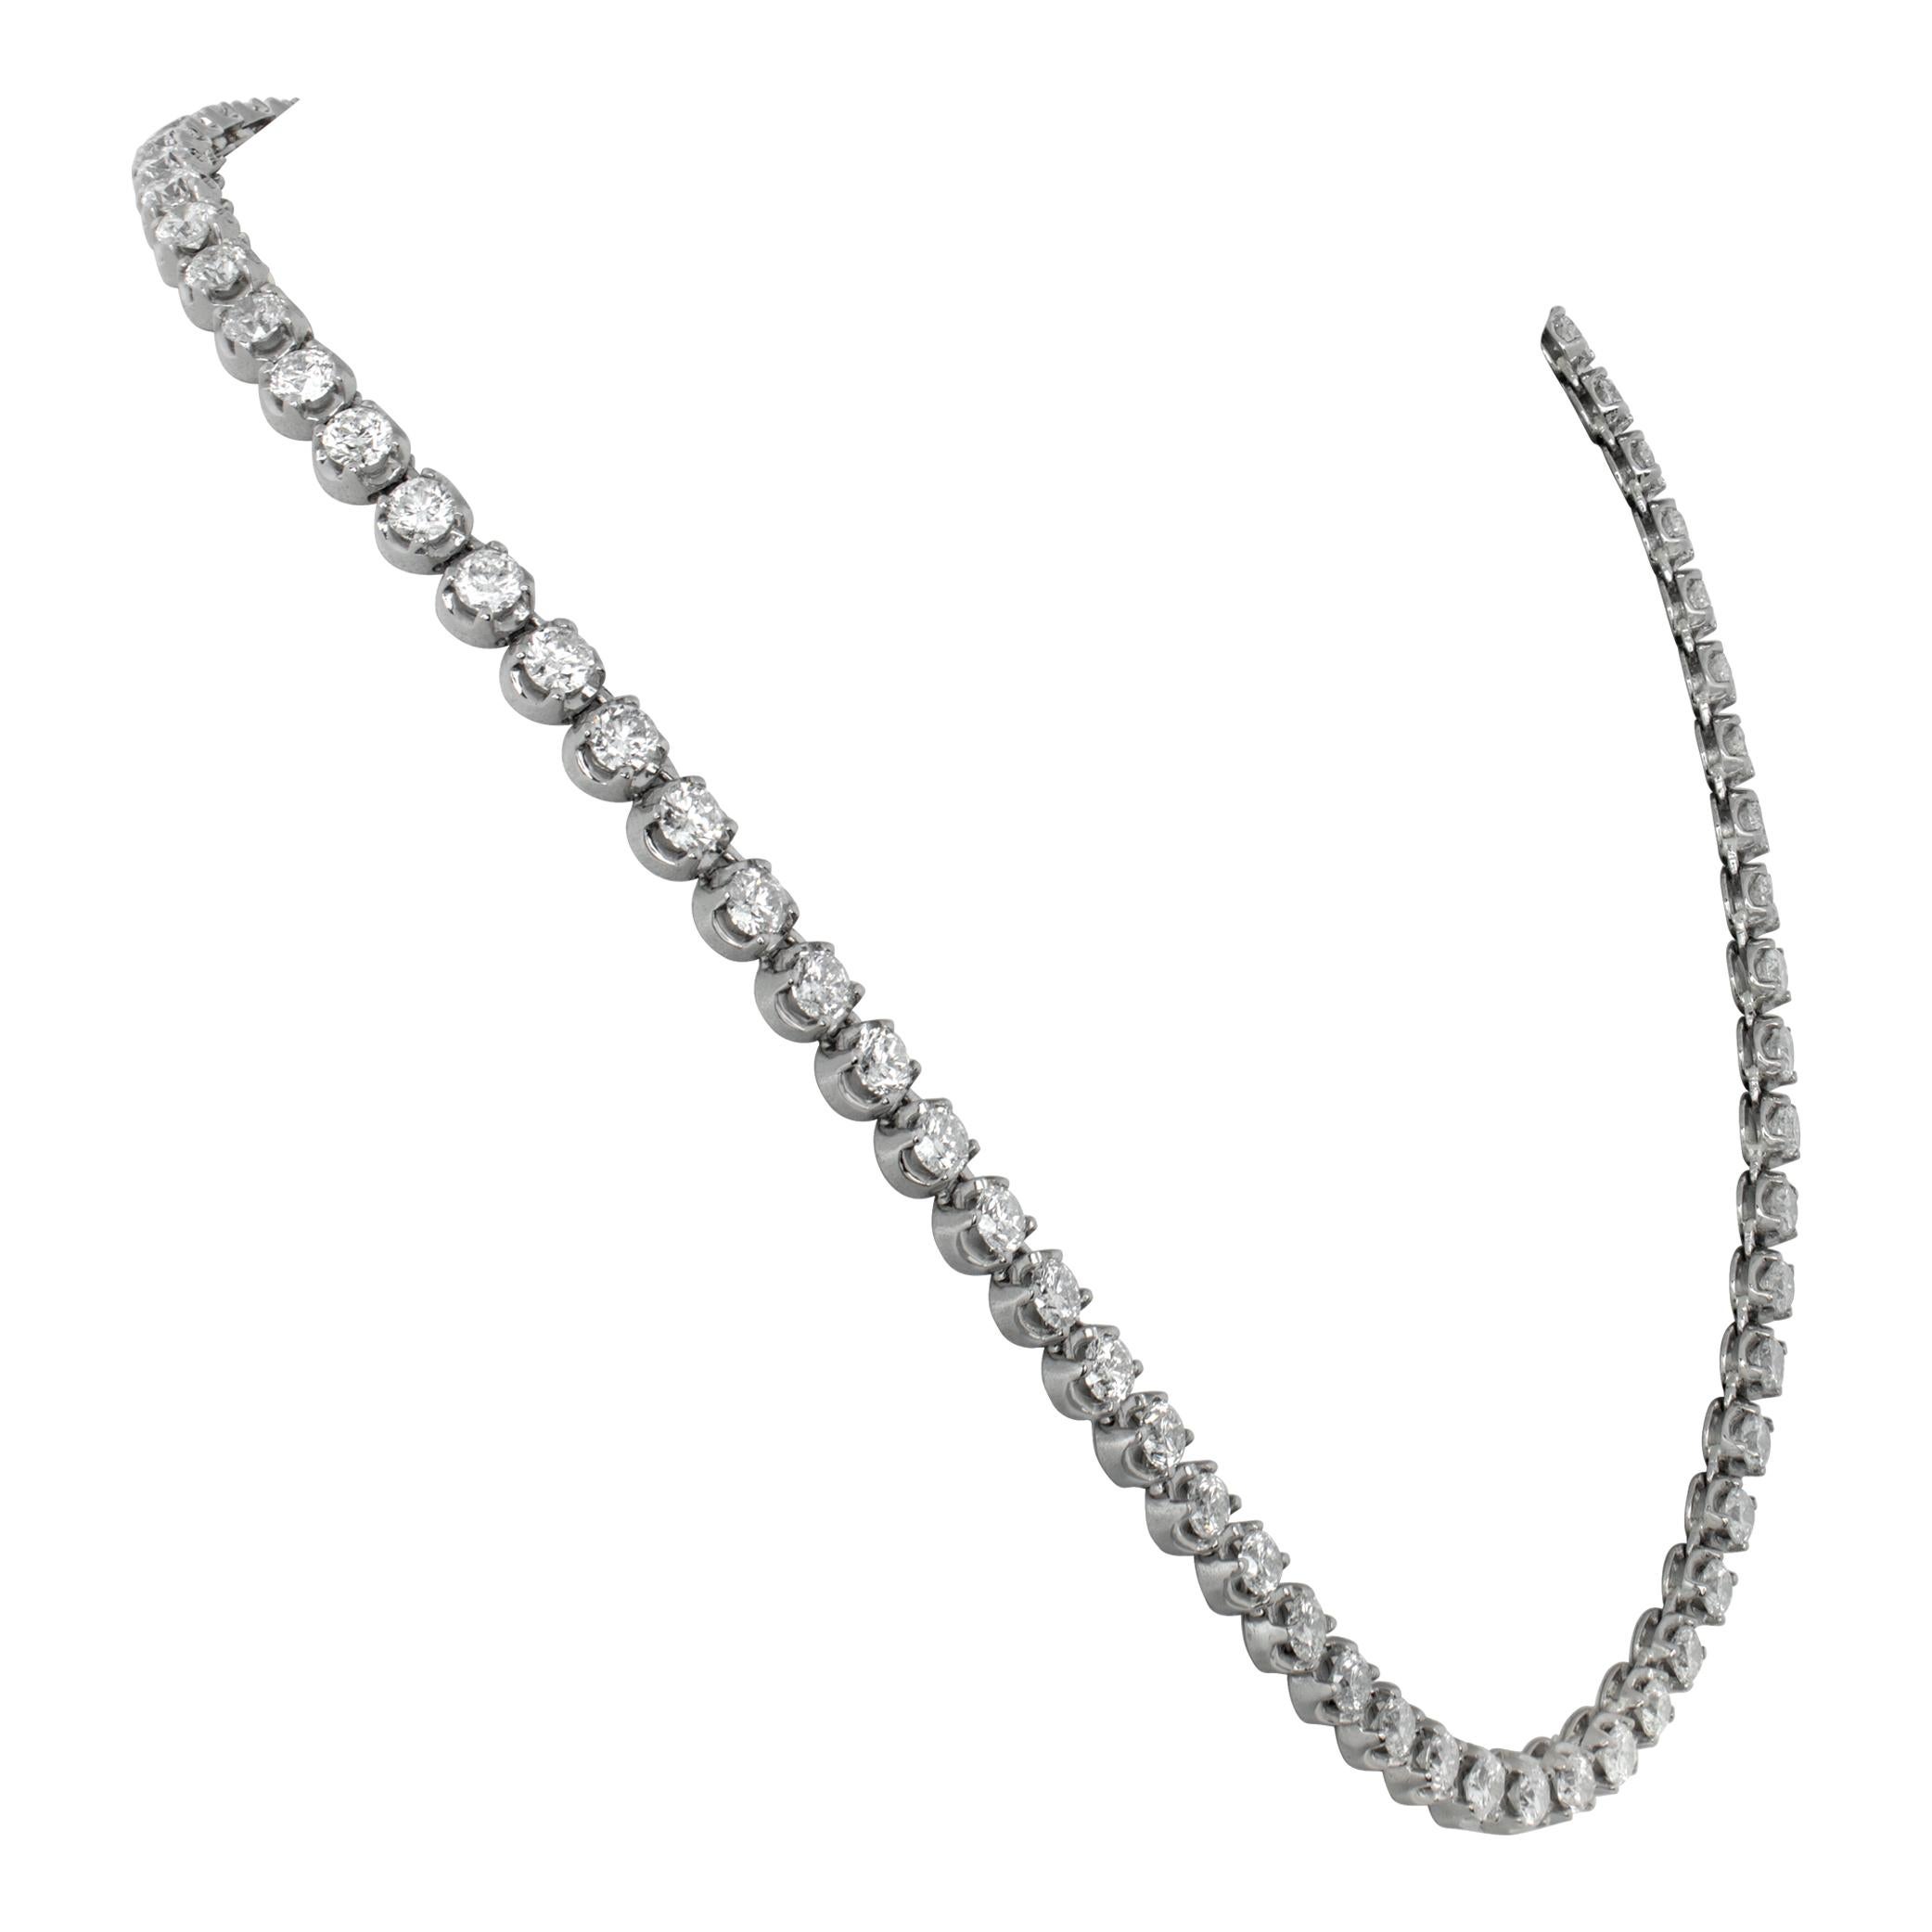 Platinum Riviera diamond necklace with round brilliant cut diamonds In Excellent Condition For Sale In Surfside, FL